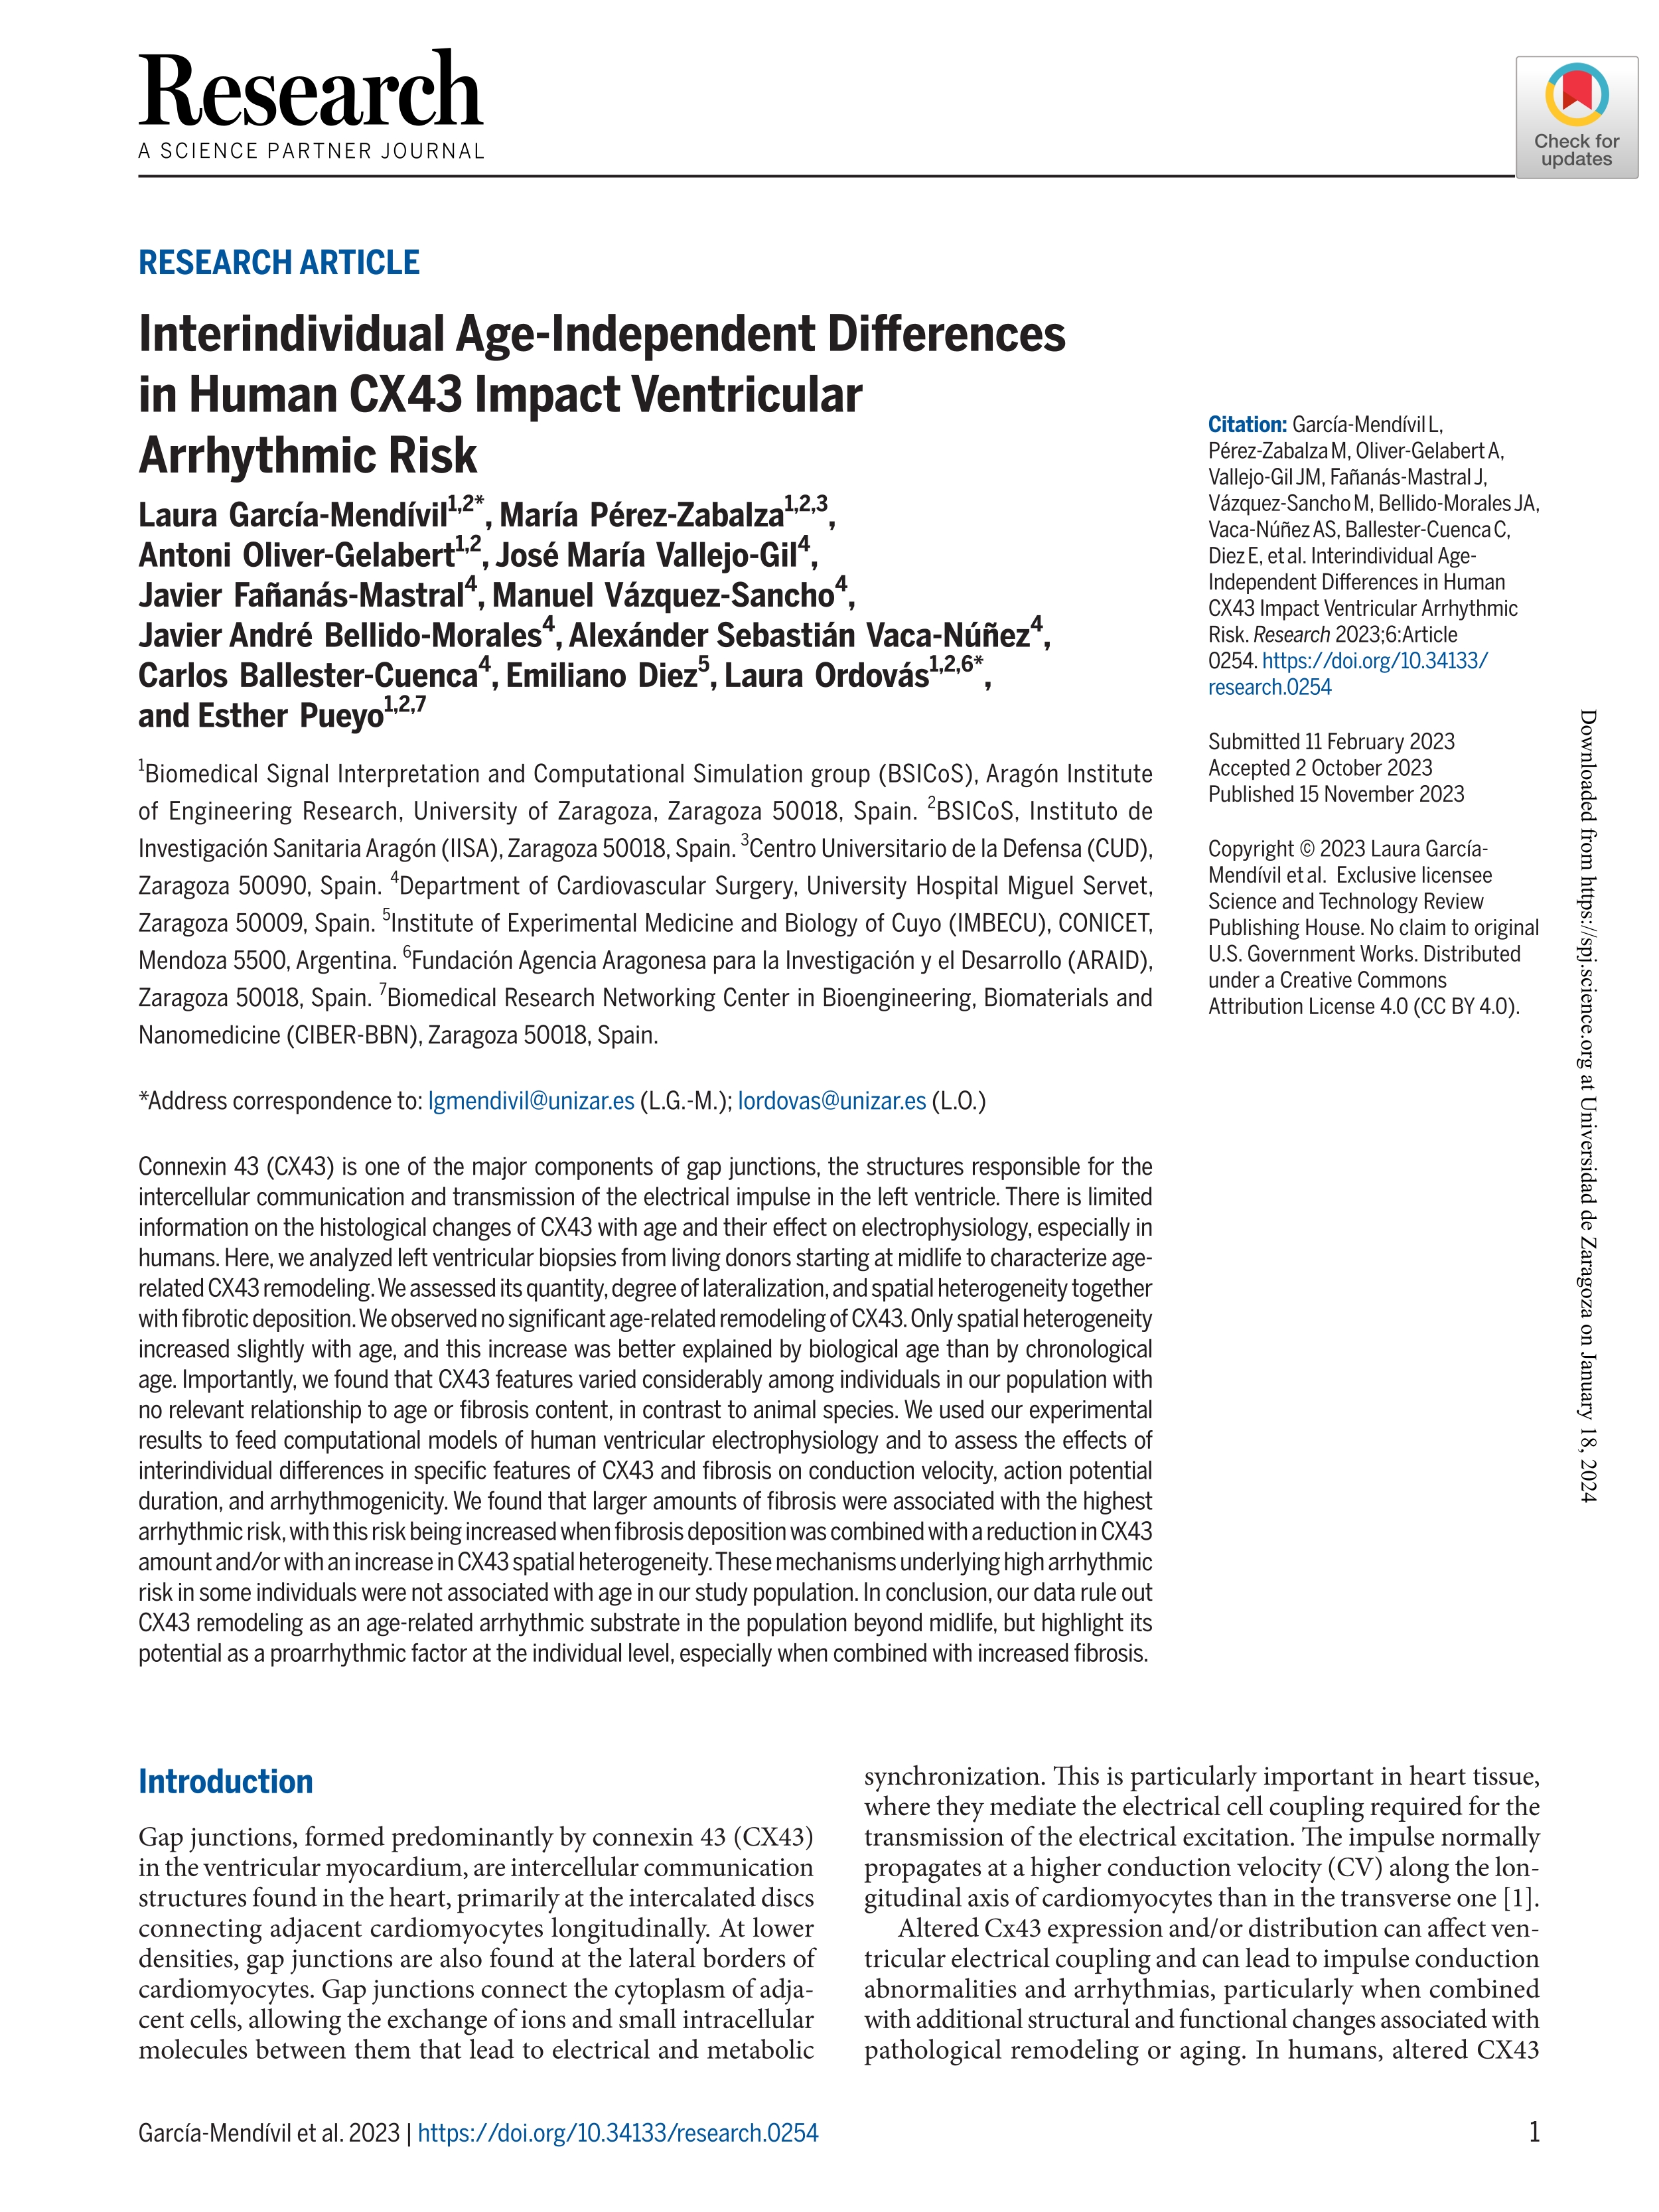 Interindividual Age-Independent Differences in Human CX43 Impact Ventricular Arrhythmic Risk